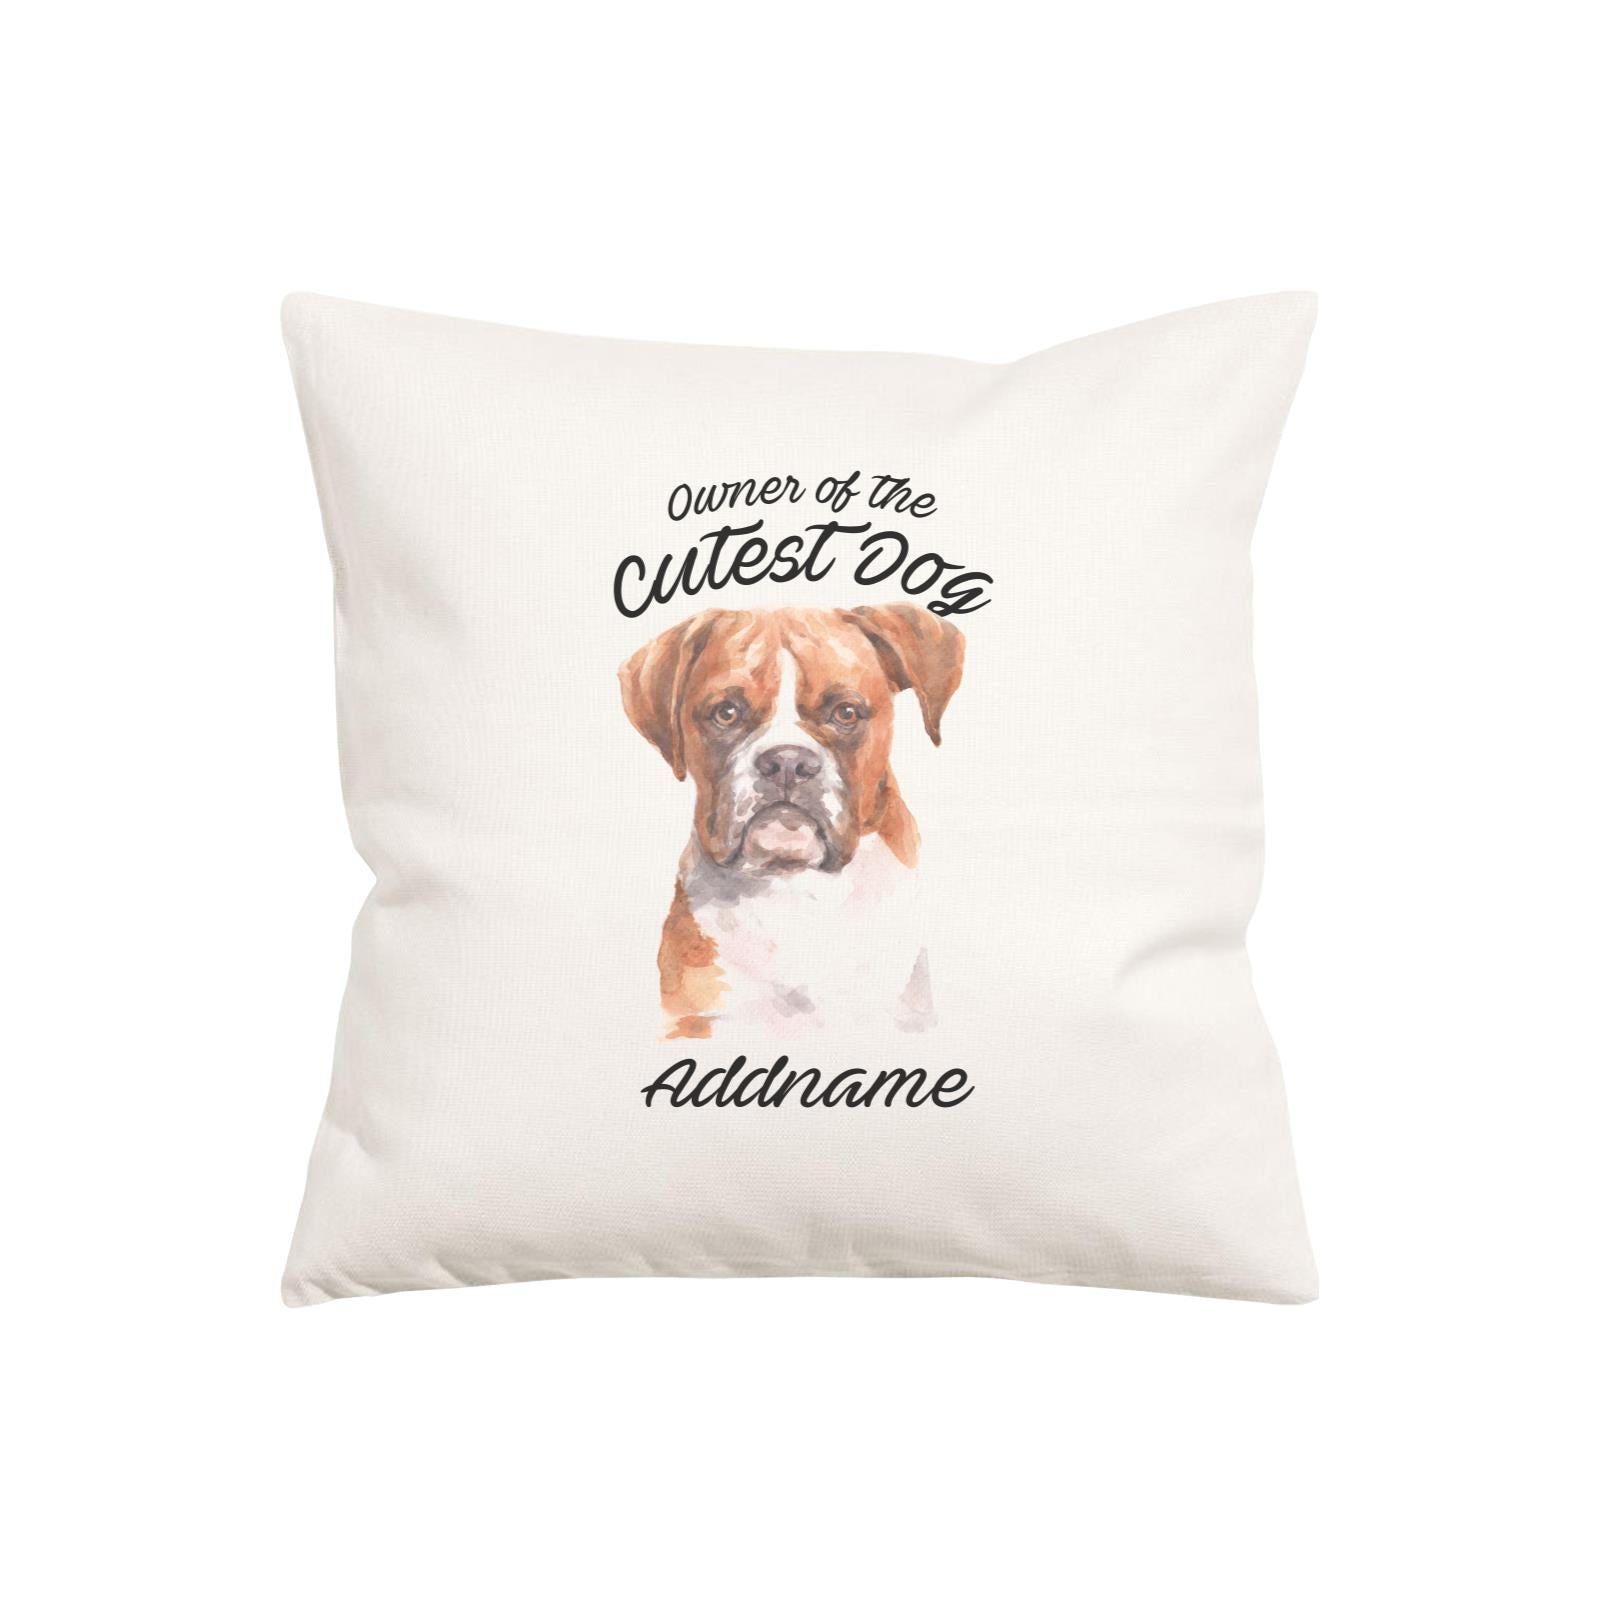 Watercolor Dog Owner Of The Cutest Dog Boxer Brown Ears Addname Pillow Cushion